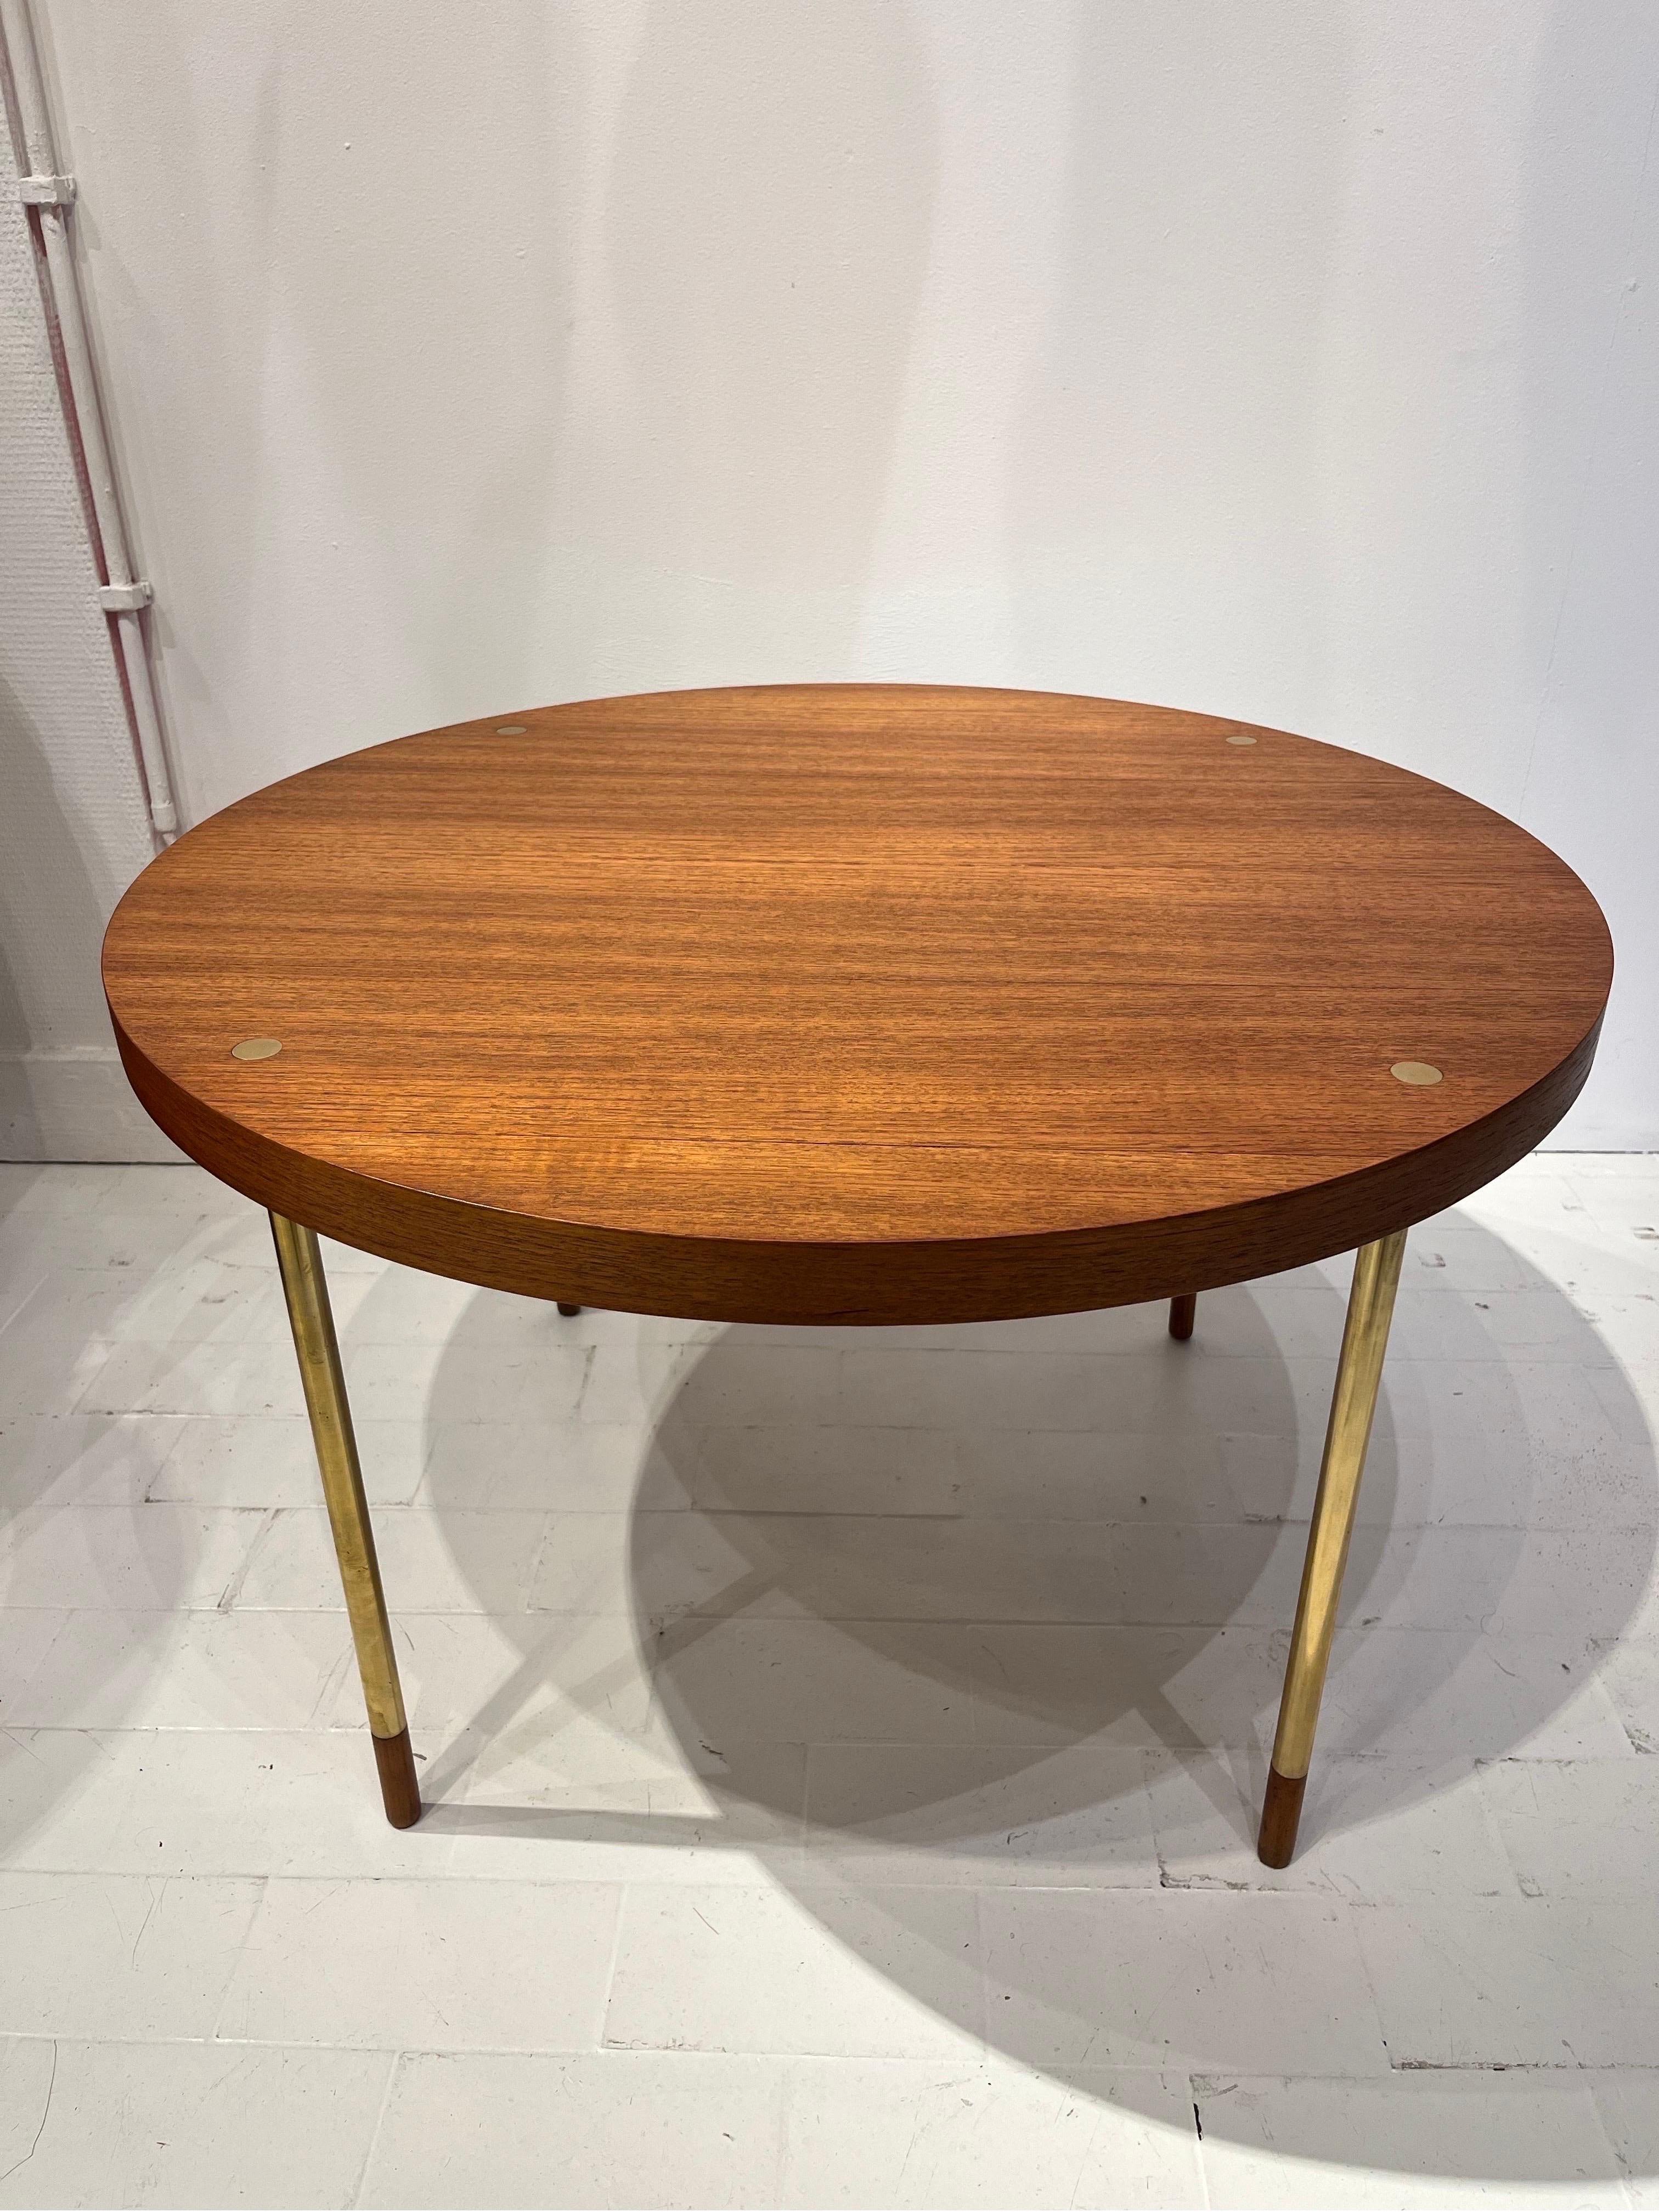 The present table is made of brass and Italian walnut veneer. The design is reminiscent of works by Ettore Sottsass who used this principle of incrusted feet into top. The contrast between the wood and the brass creates a well achieved decorative